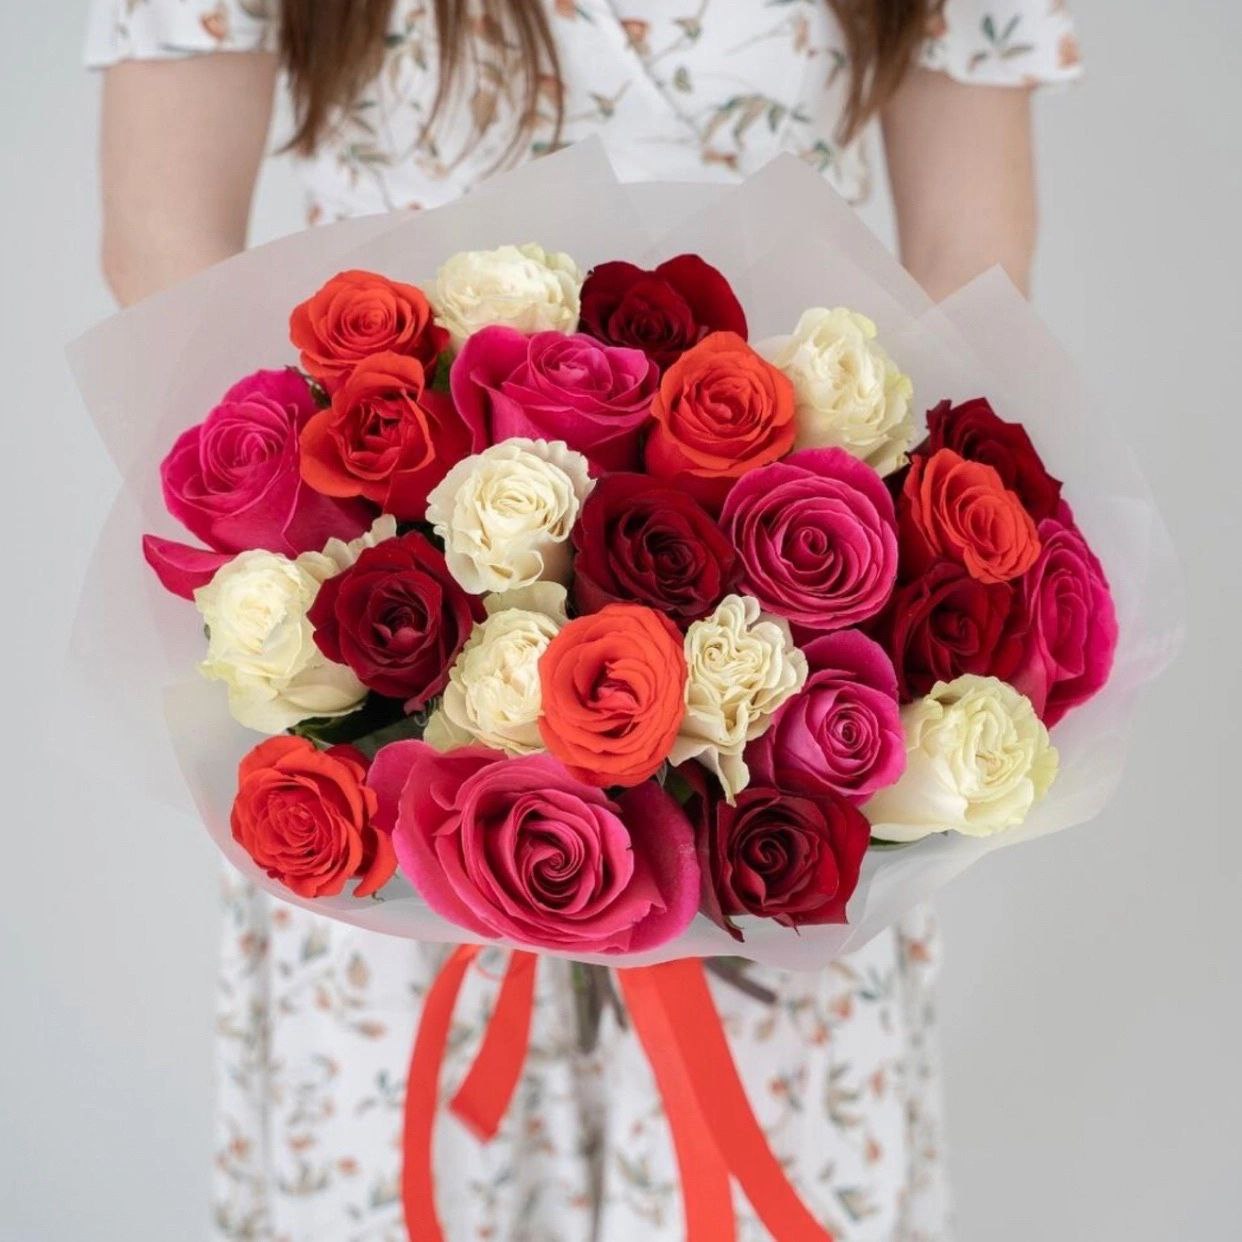 Special offer 25 roses